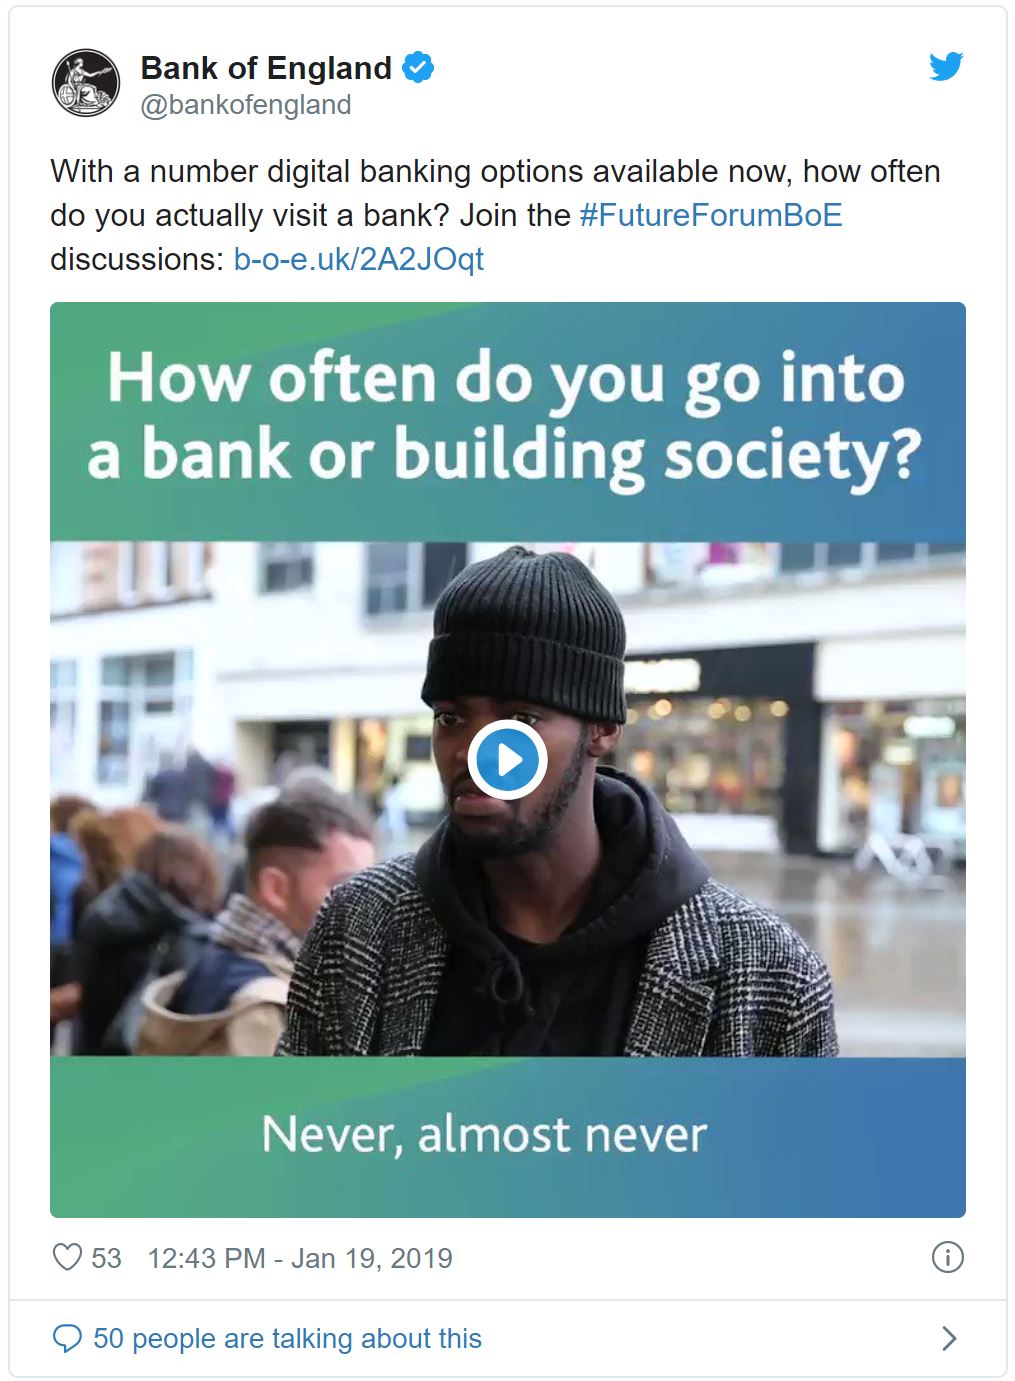 Tweet asking 'How often do you go into a bank or building society?'